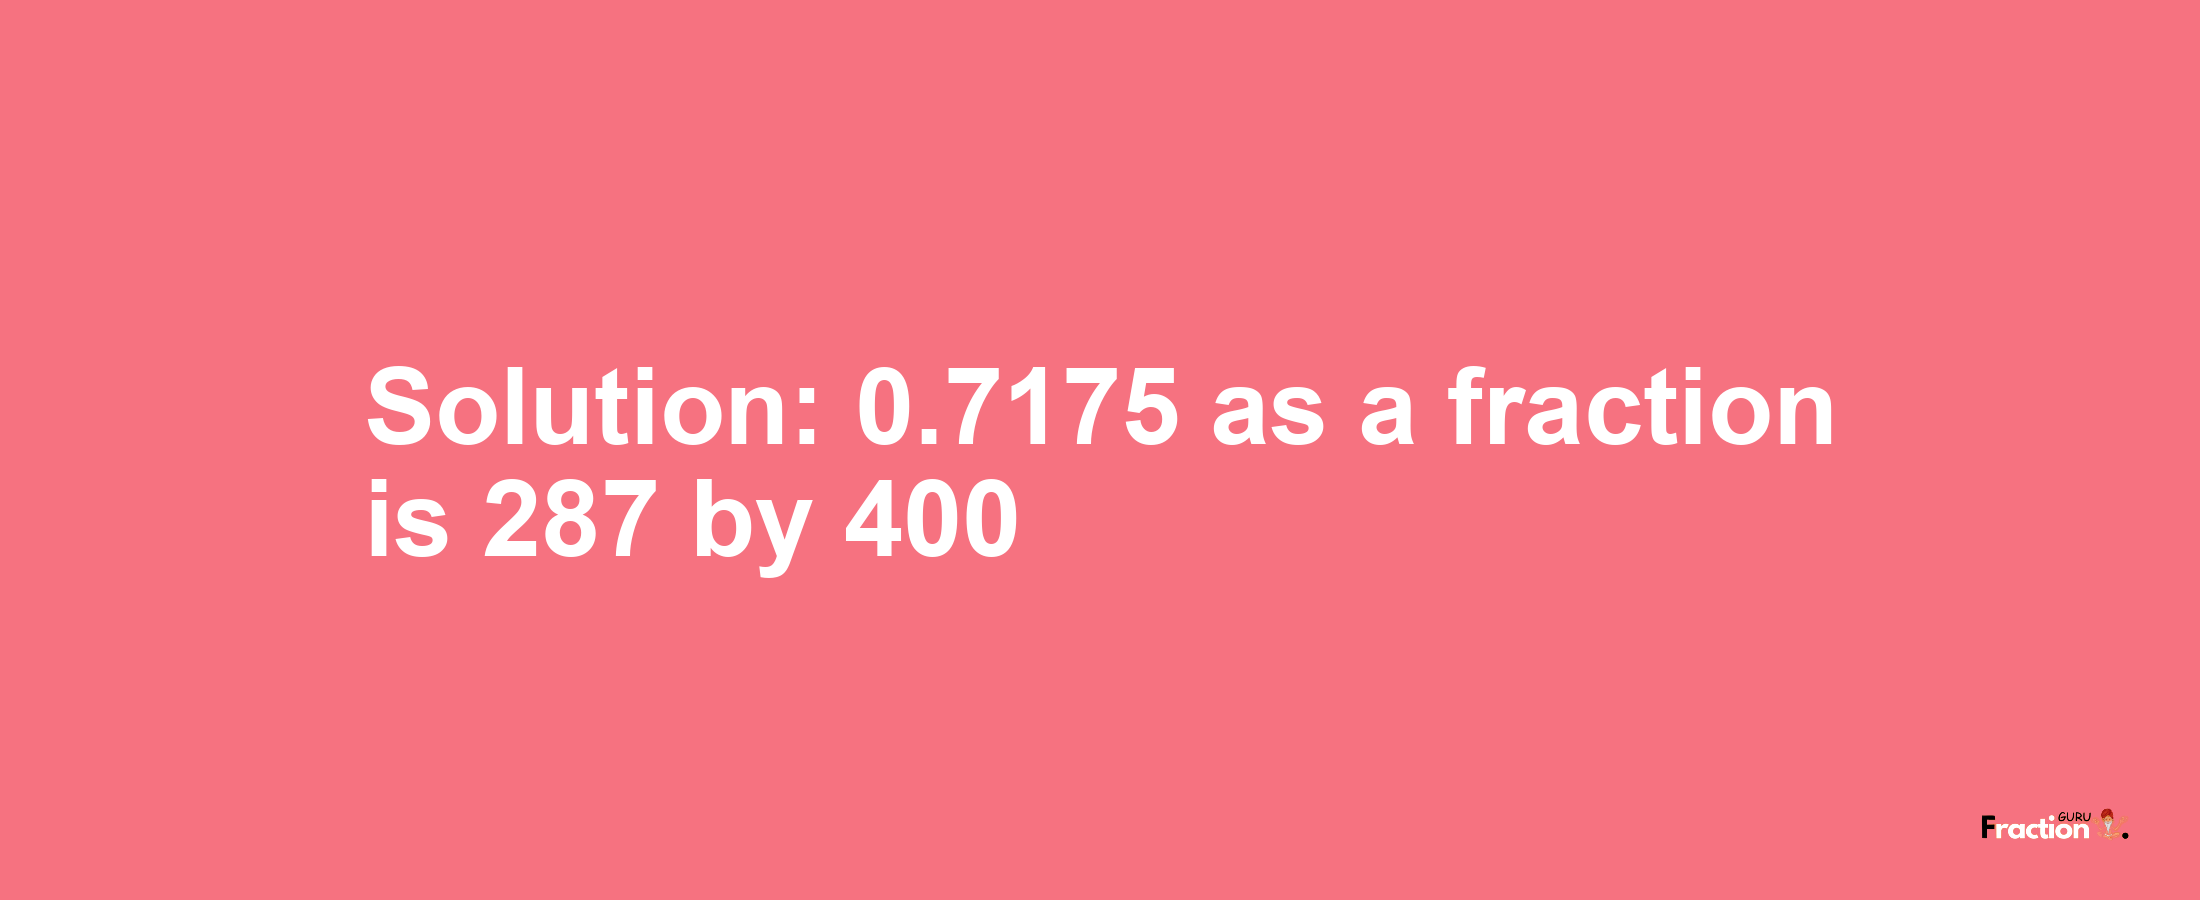 Solution:0.7175 as a fraction is 287/400